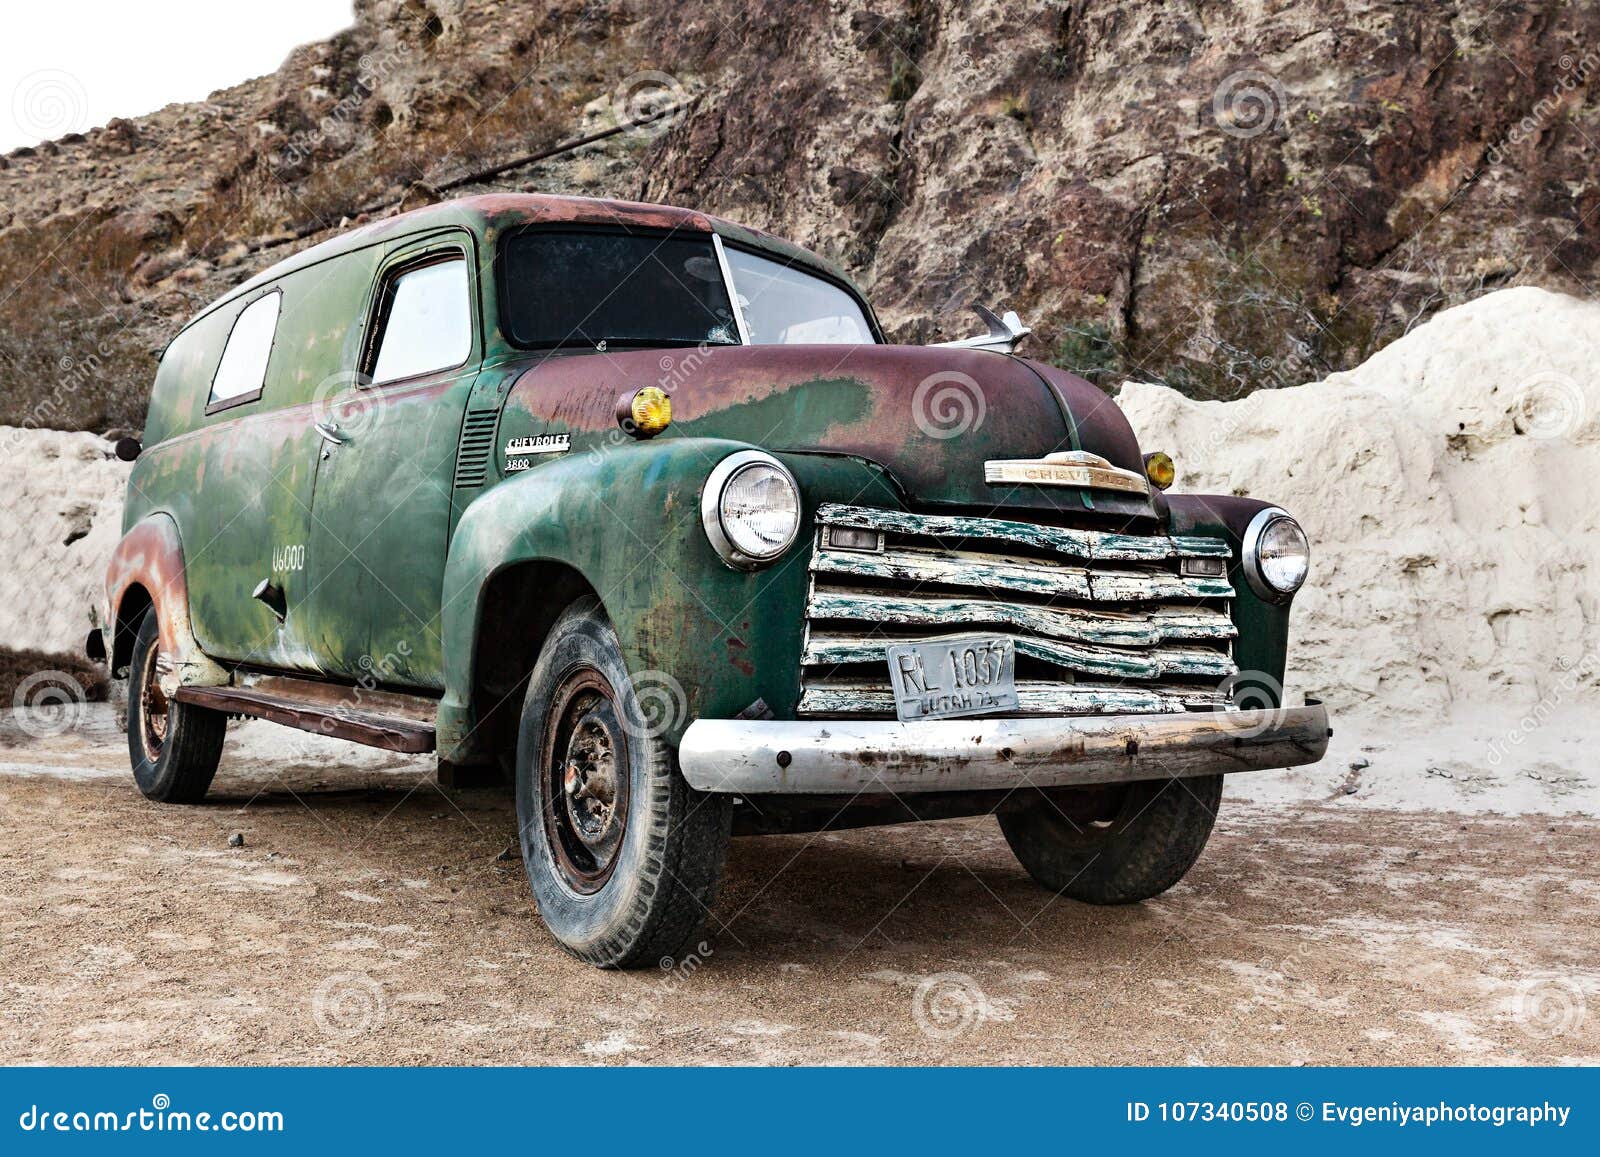 green vintage car desert nevada usa nelson november old rusty truck ghost town image